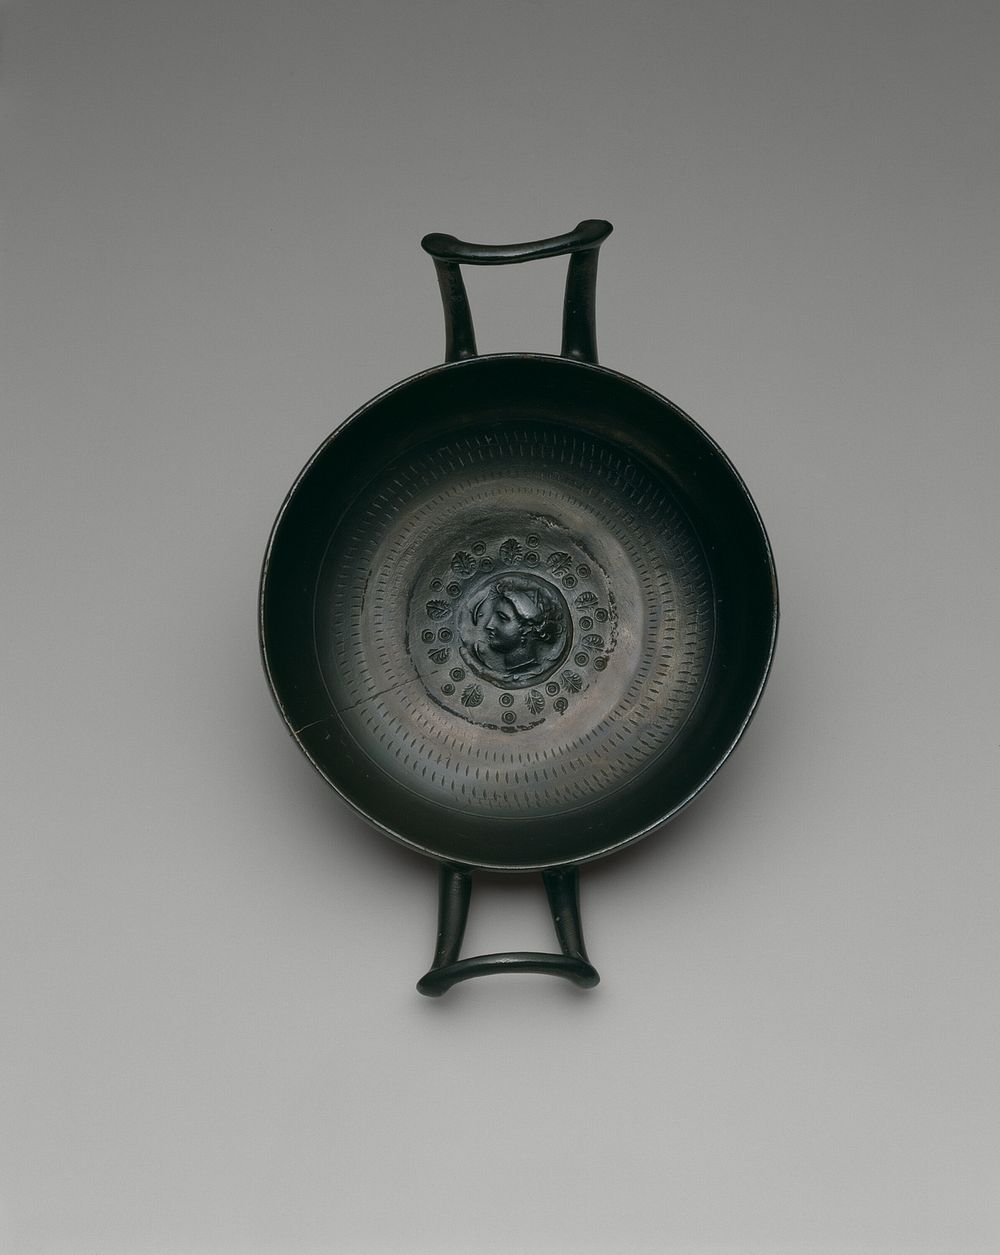 Stemless Kylix (Drinking Cup) by Ancient Greek